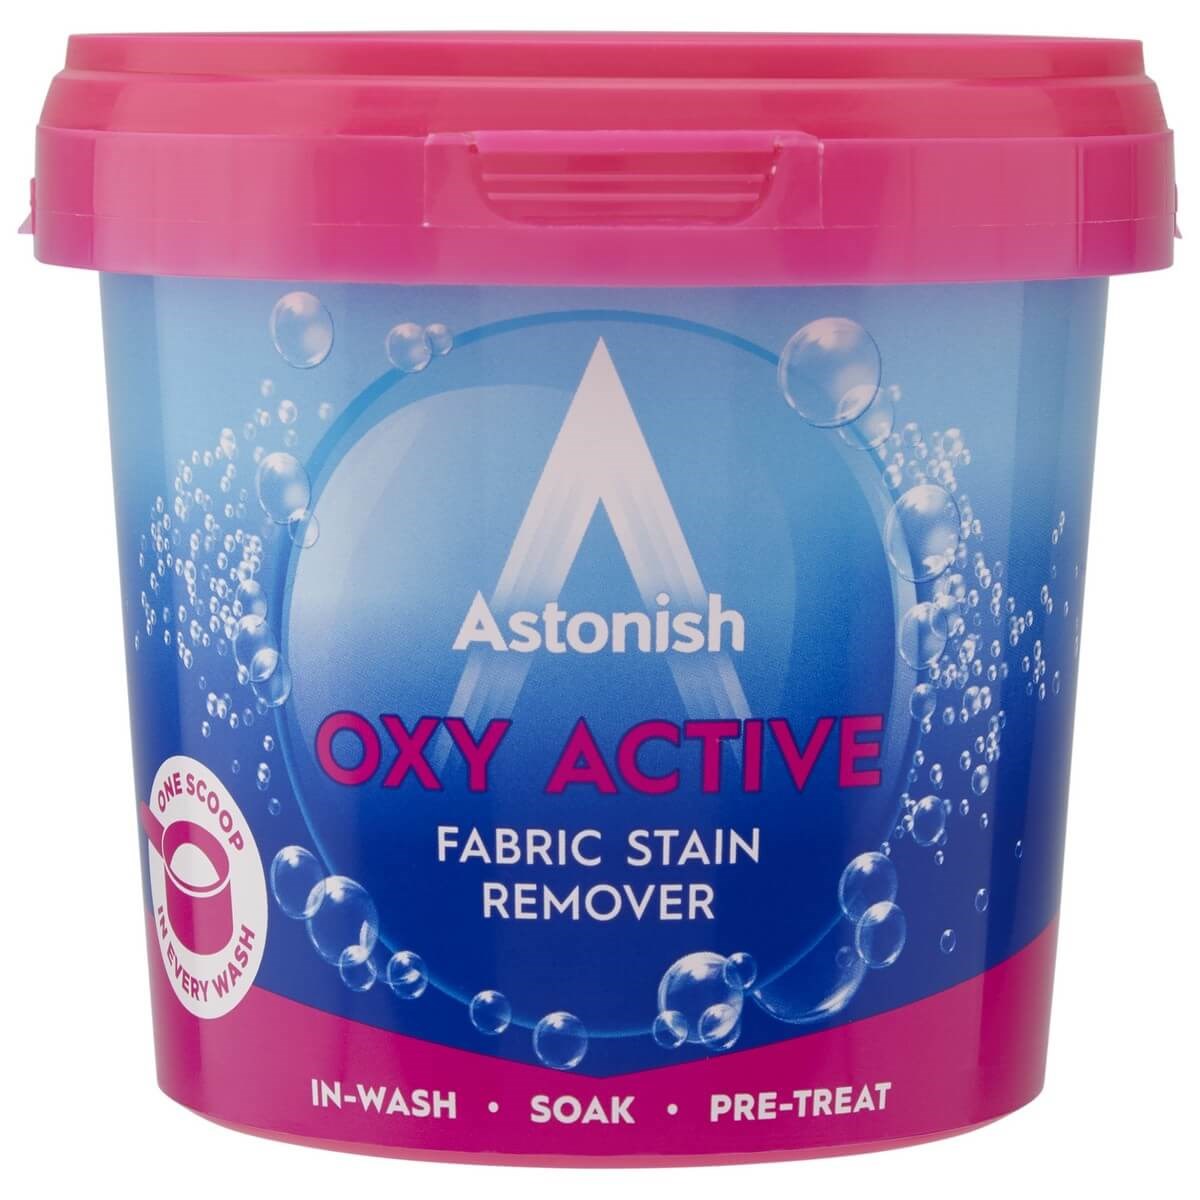 Astonish Oxy Active Fabric Stain Remover 500g